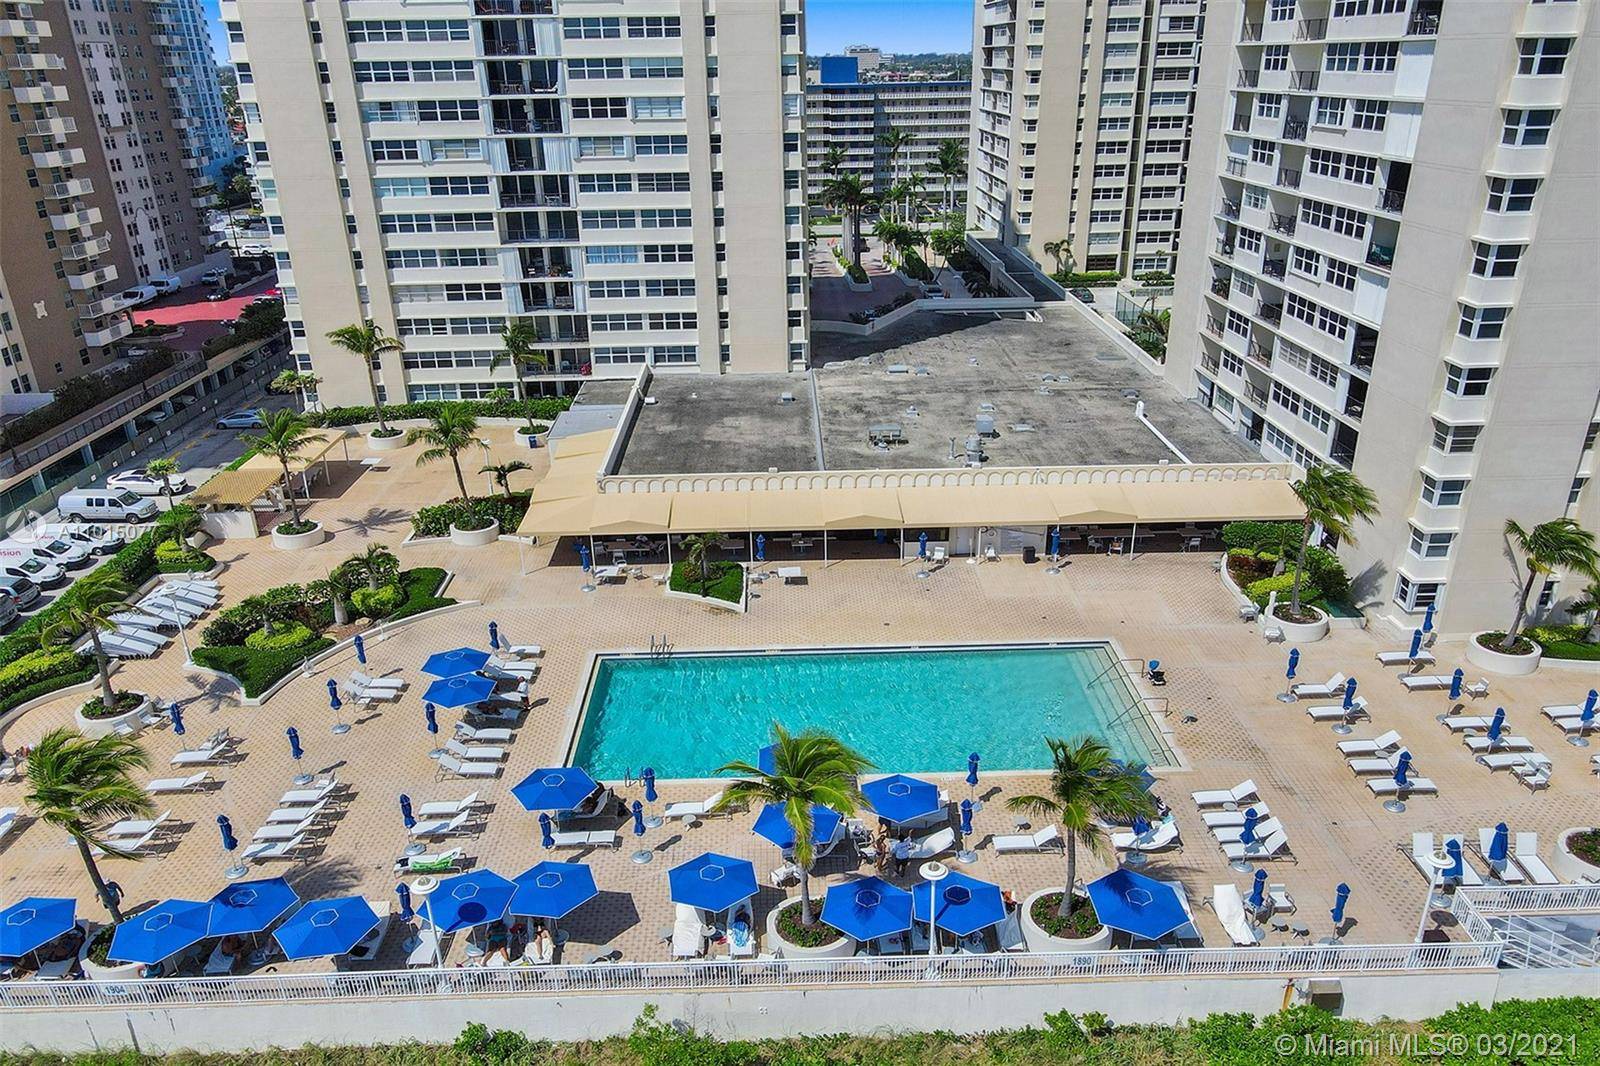 Breathtaking views abound in this meticulously renovated direct ocean city view condo located in Hallandale's highly sought after La Mer Estates.